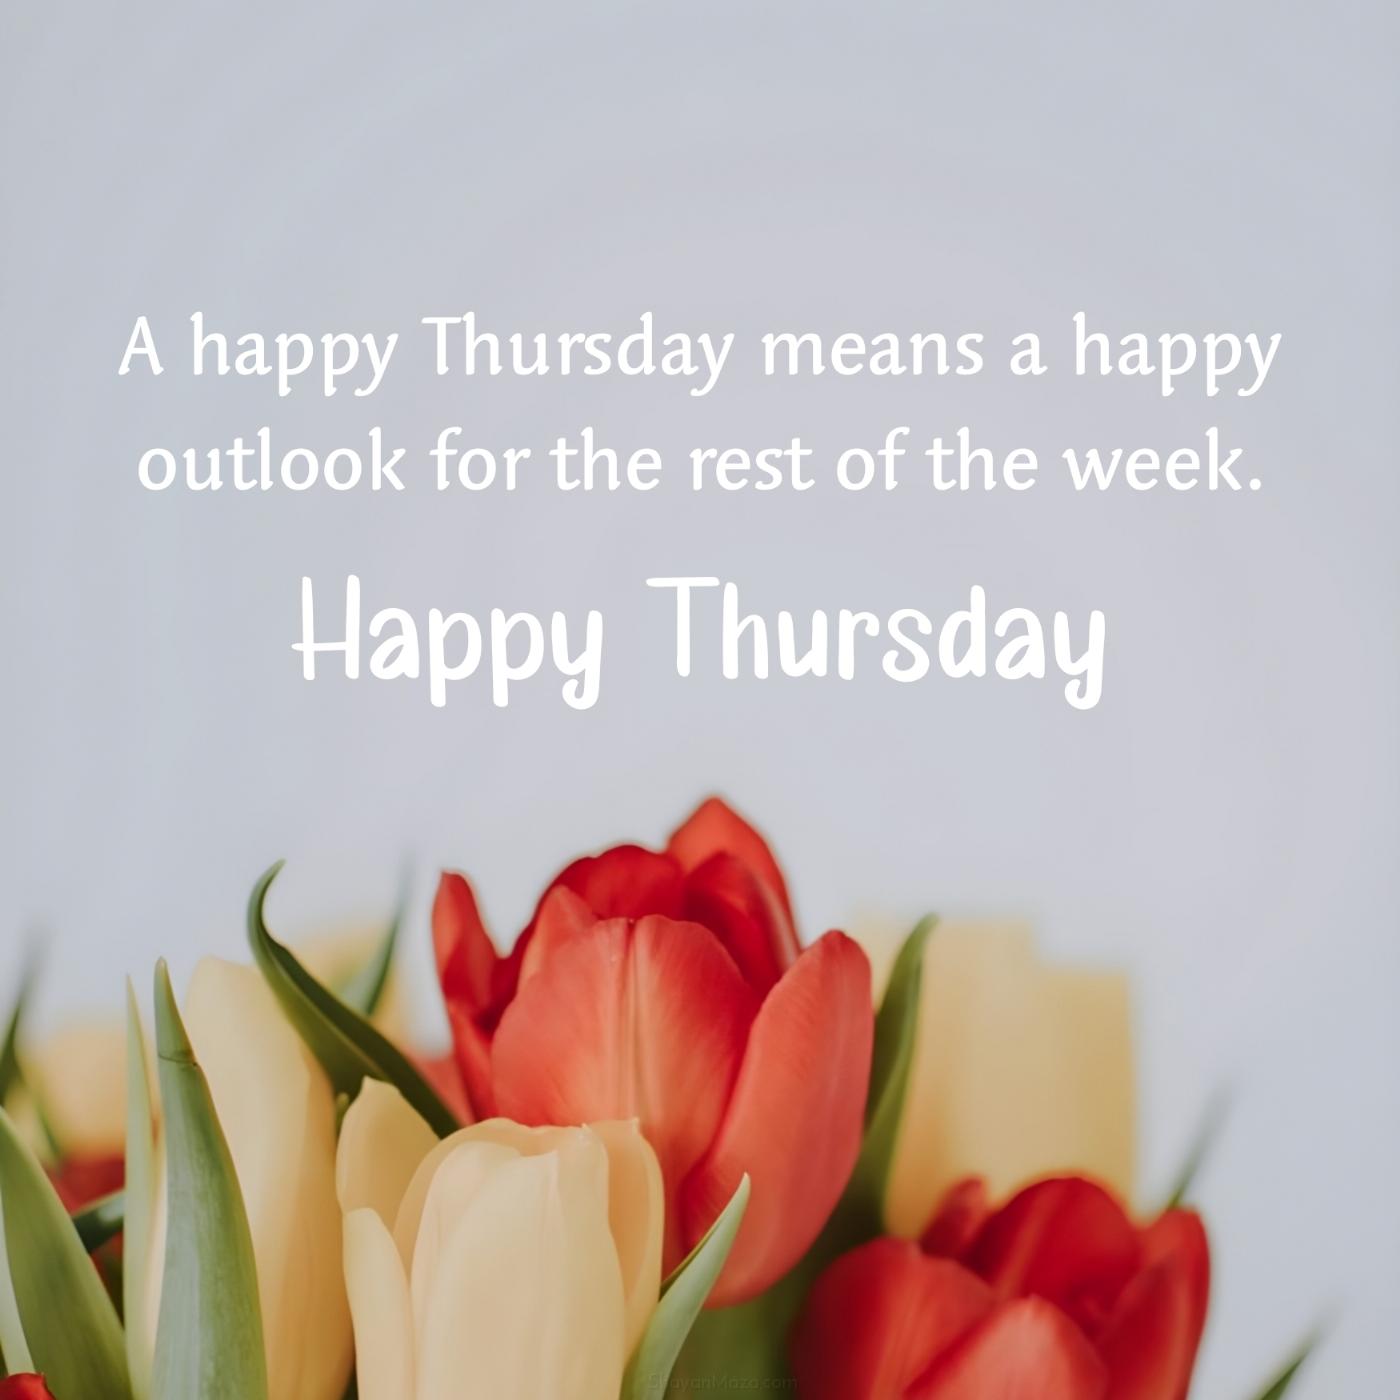 A happy Thursday means a happy outlook